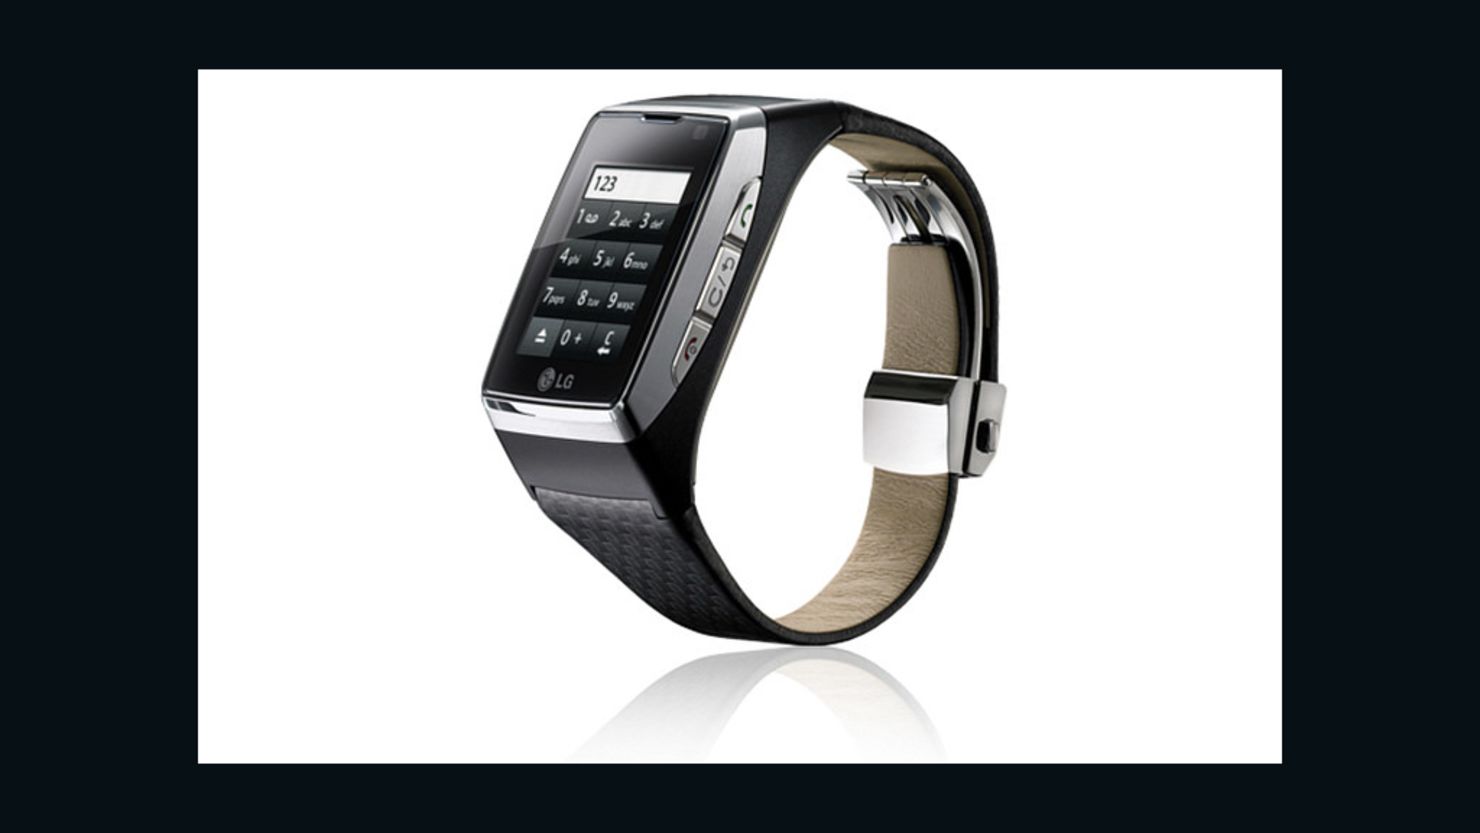 LG already makes the GD910 watch, with a touchscreen, video calling an MP3 player and voice recognition technology.